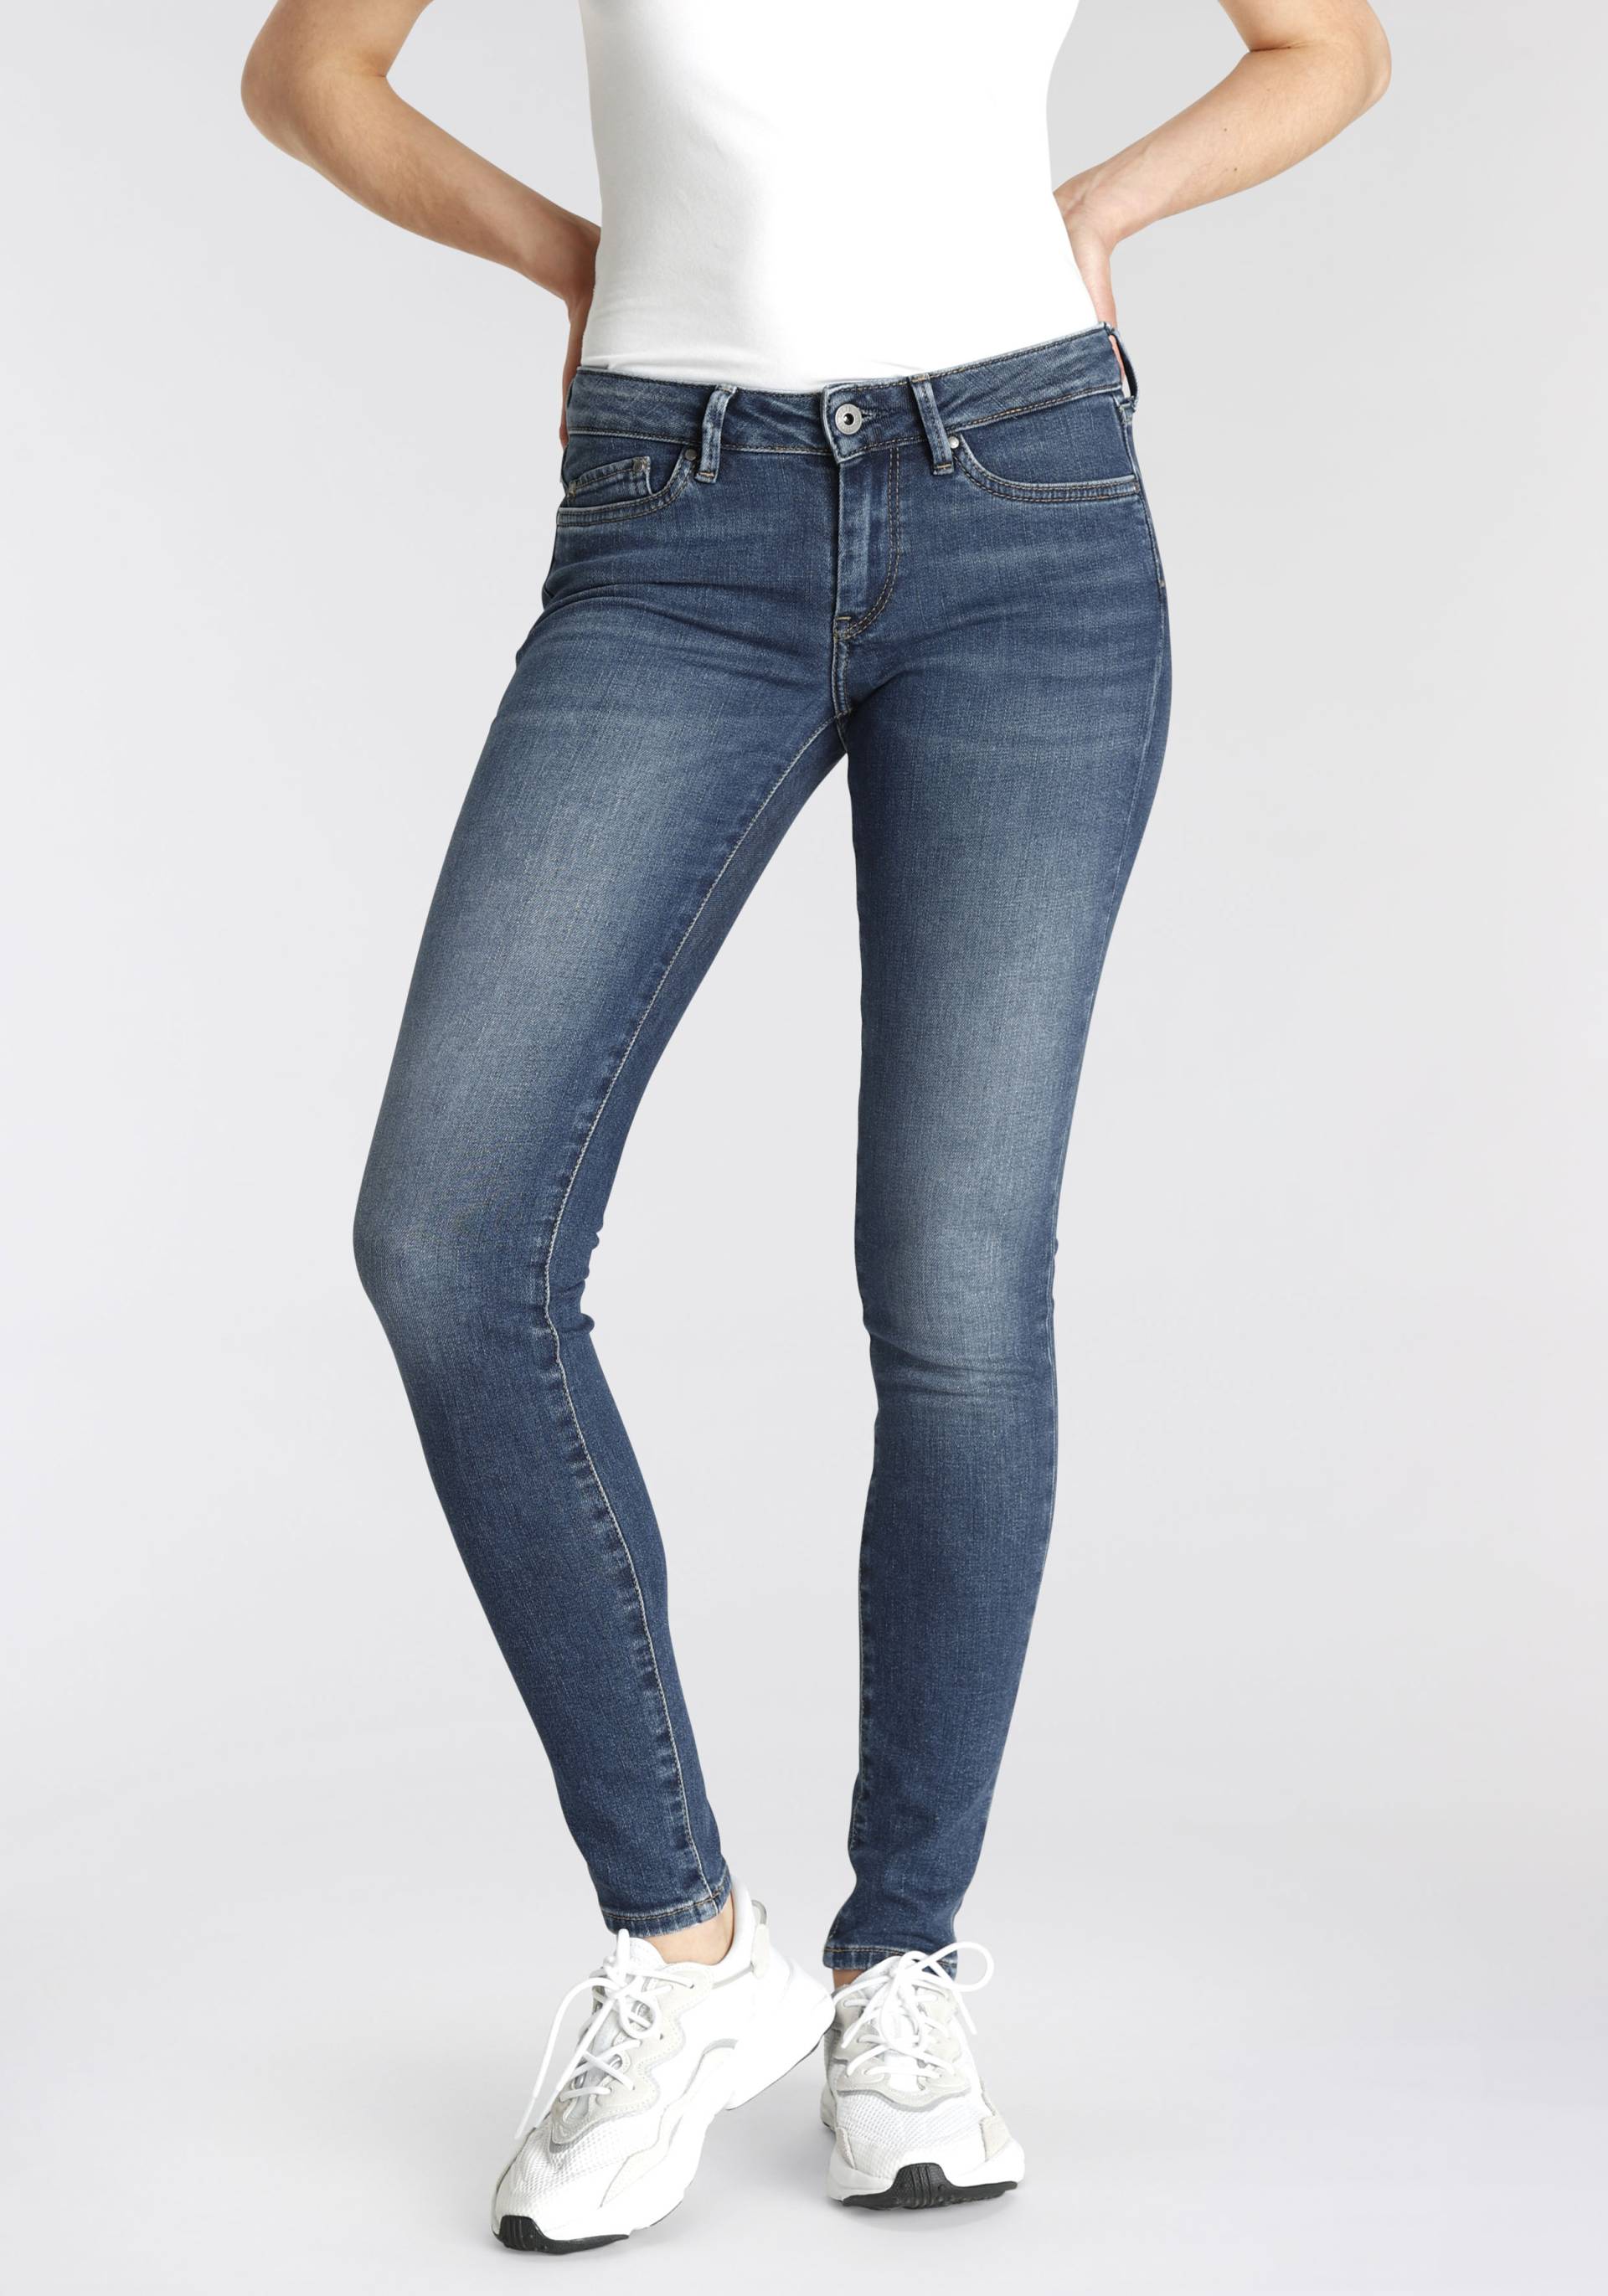 Pepe Jeans Skinny-fit-Jeans »Pixie« von Pepe Jeans